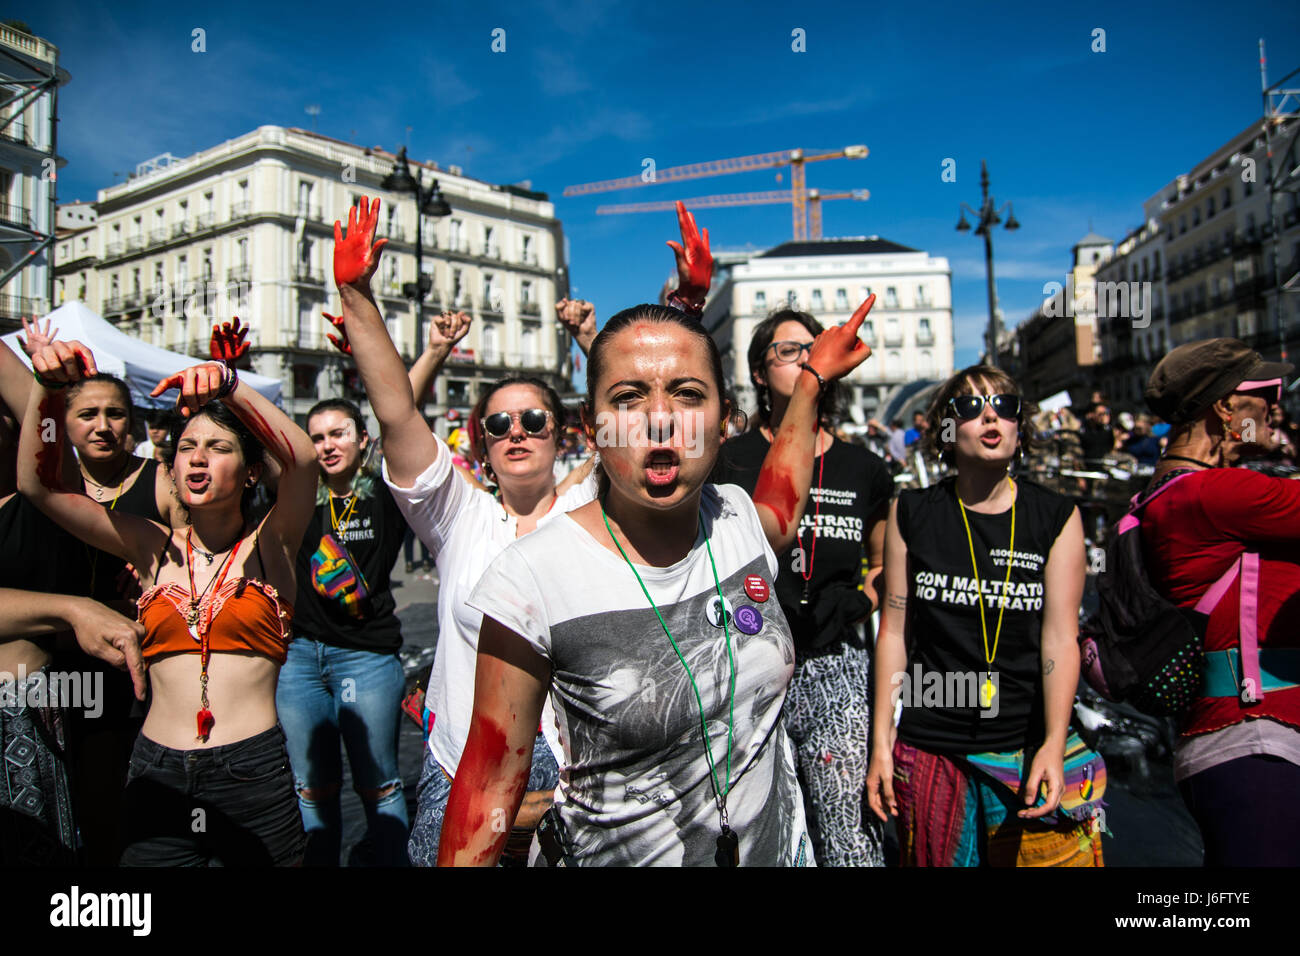 Madrid, Spain. 20th May, 2017. Women with their hands painted in red protesting against gender violence demanding to all political parties to take actions. Credit: Marcos del Mazo/Alamy Live News Stock Photo